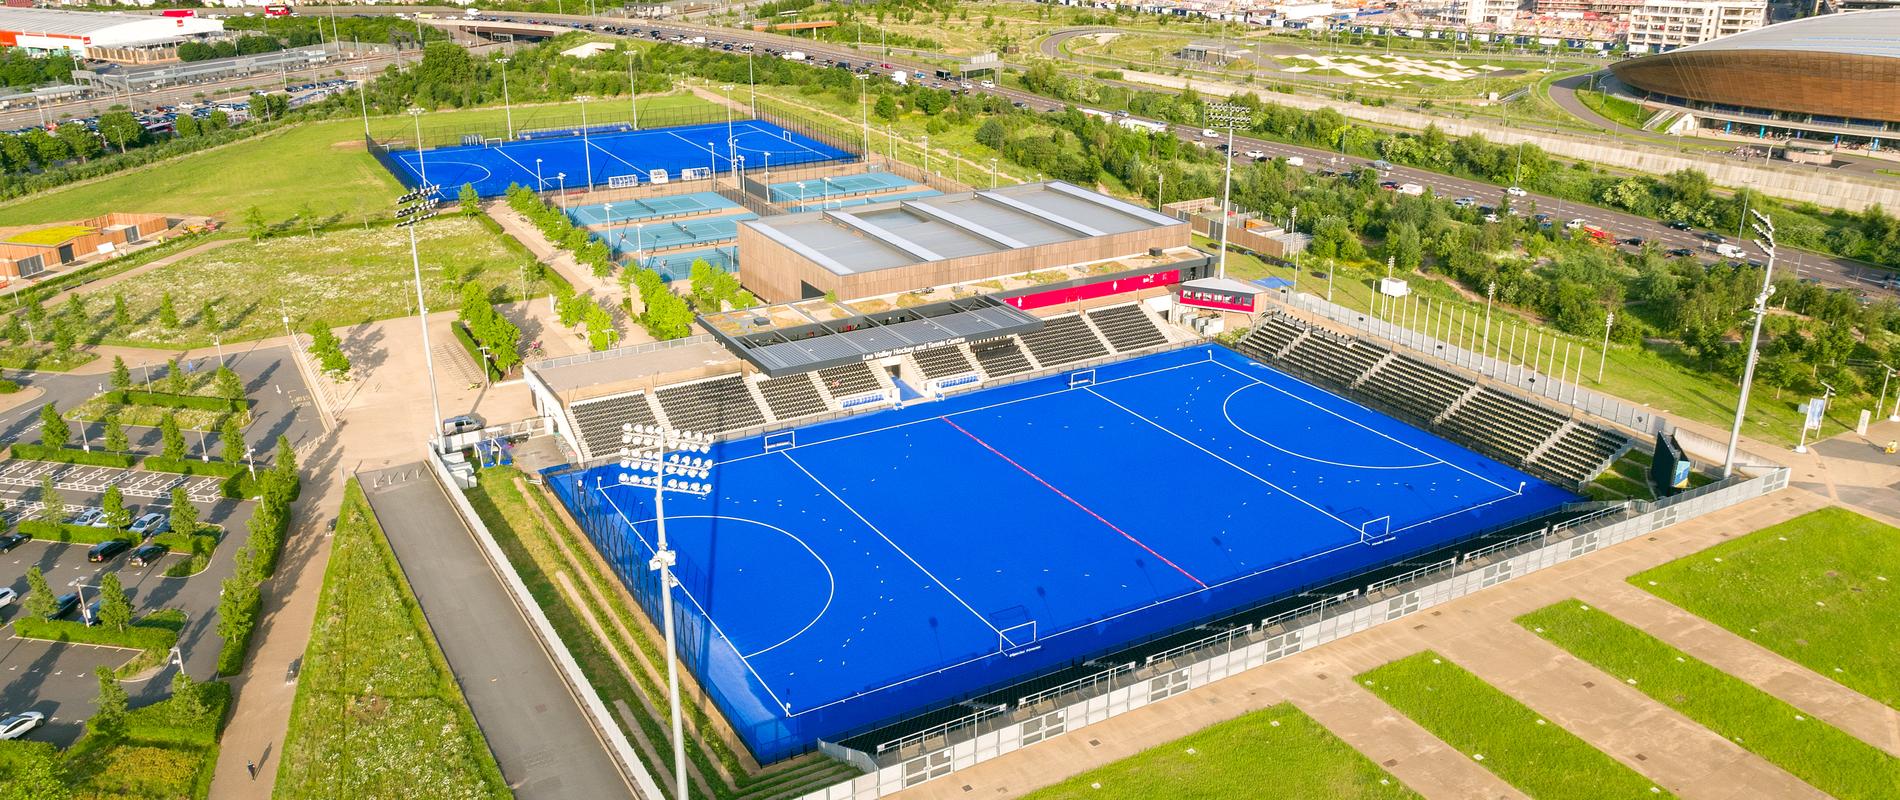 Lee Valley Hockey and Tennis Centre 2018 - Polytan